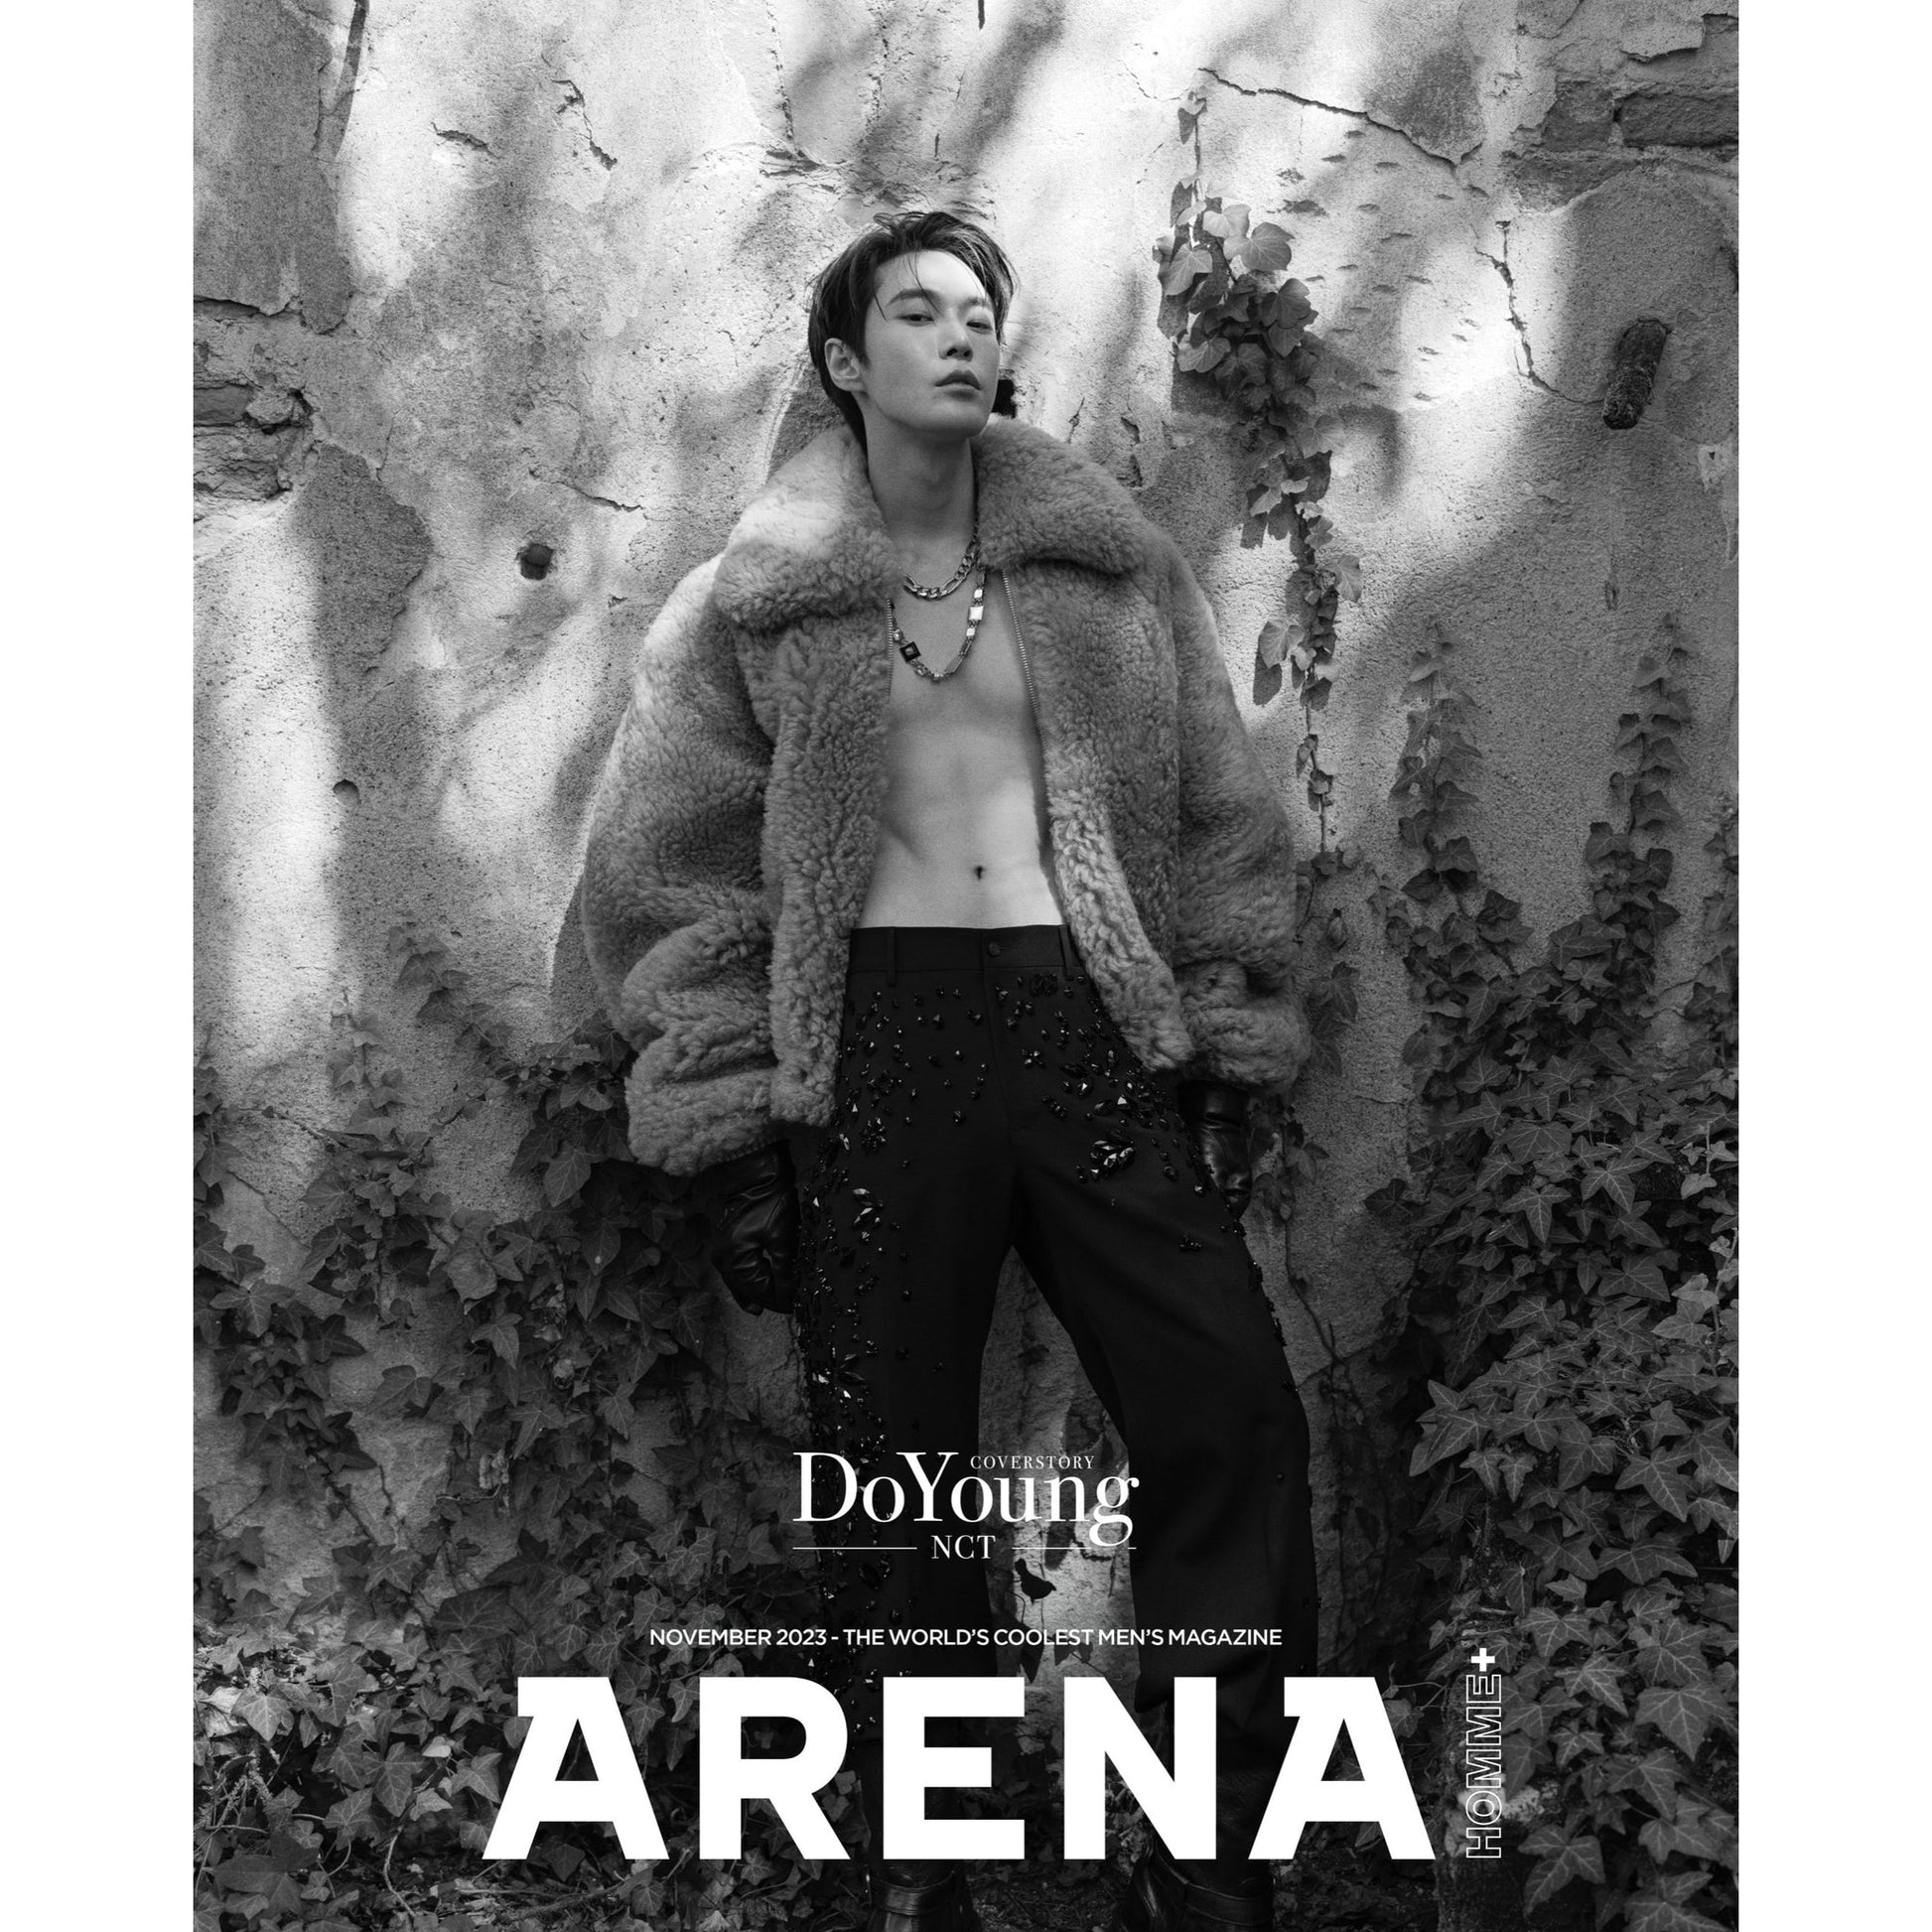 NCT 127 DOYOUNG - ARENA HOMME MAGAZINE 2023